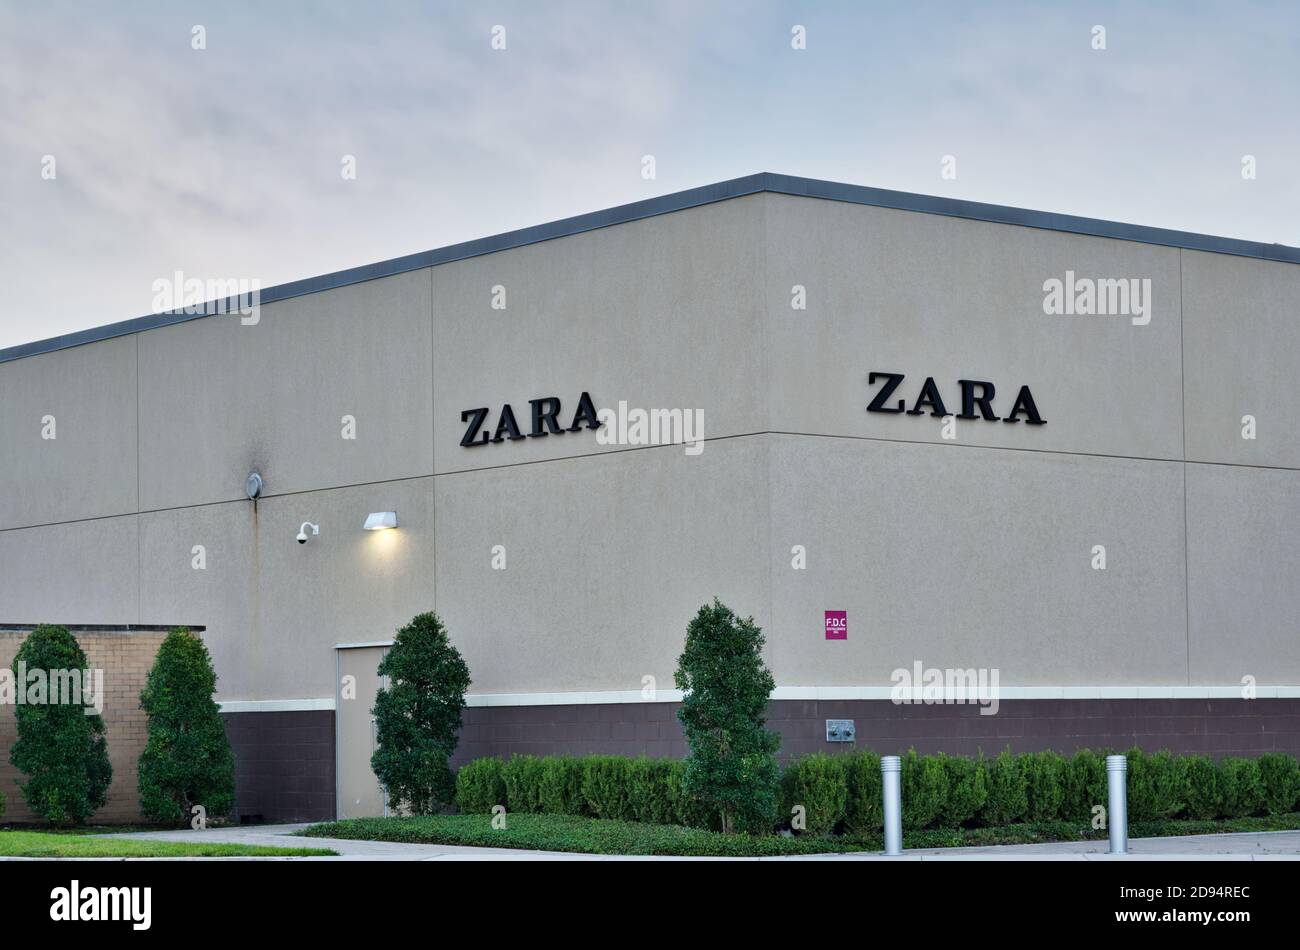 Page 2 - Zara Sign High Resolution Stock Photography and Images - Alamy